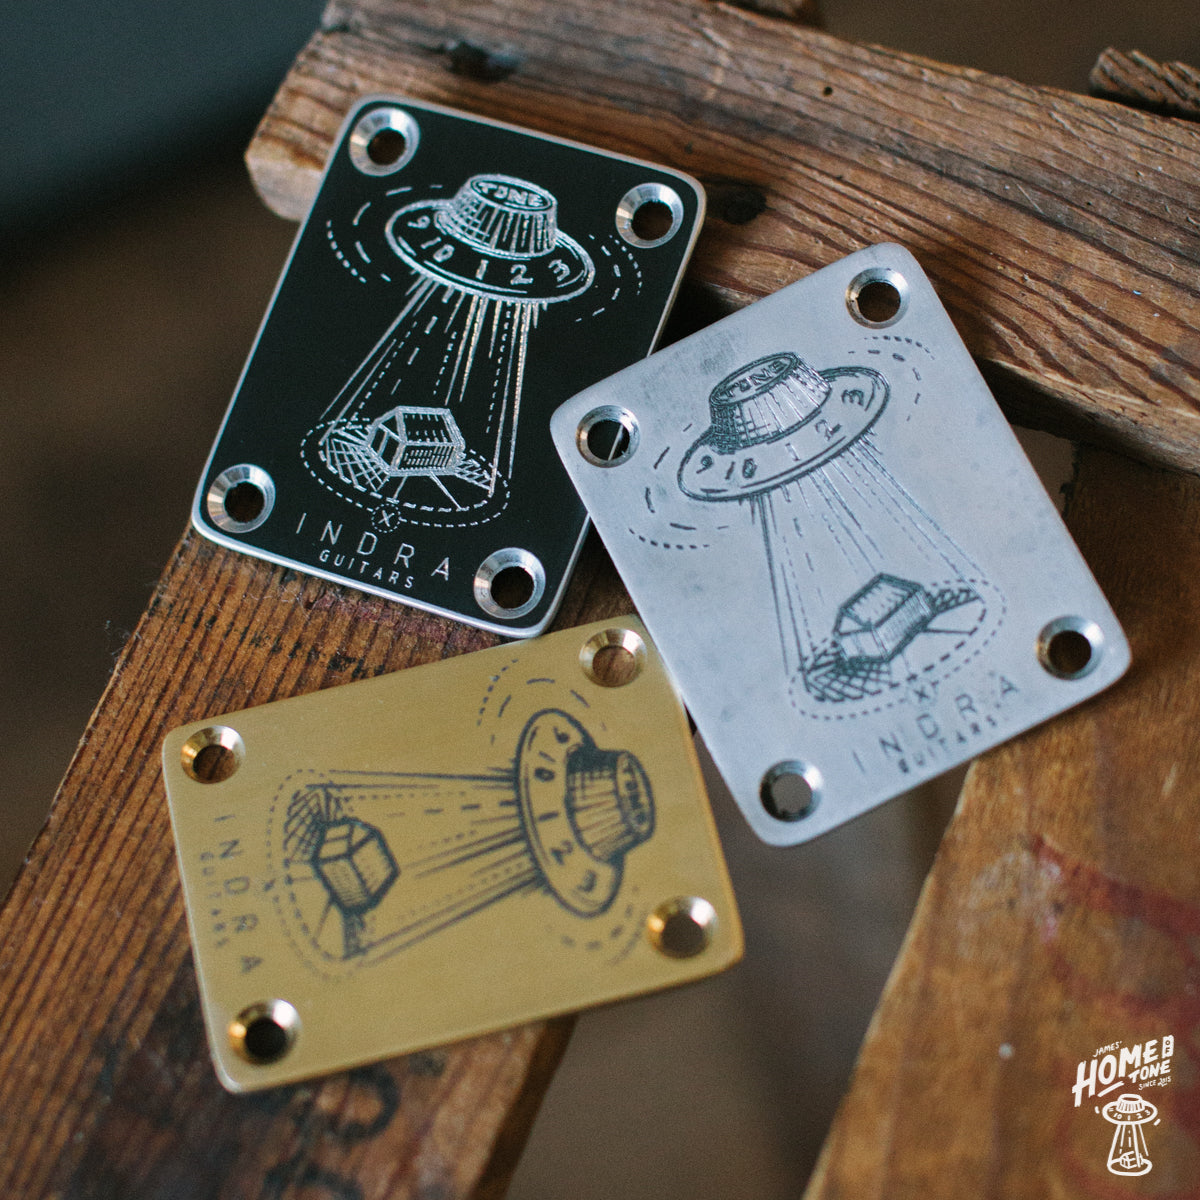 Indra Guitars x Home of Tone exclusive 4 bolt UFO neck plates!